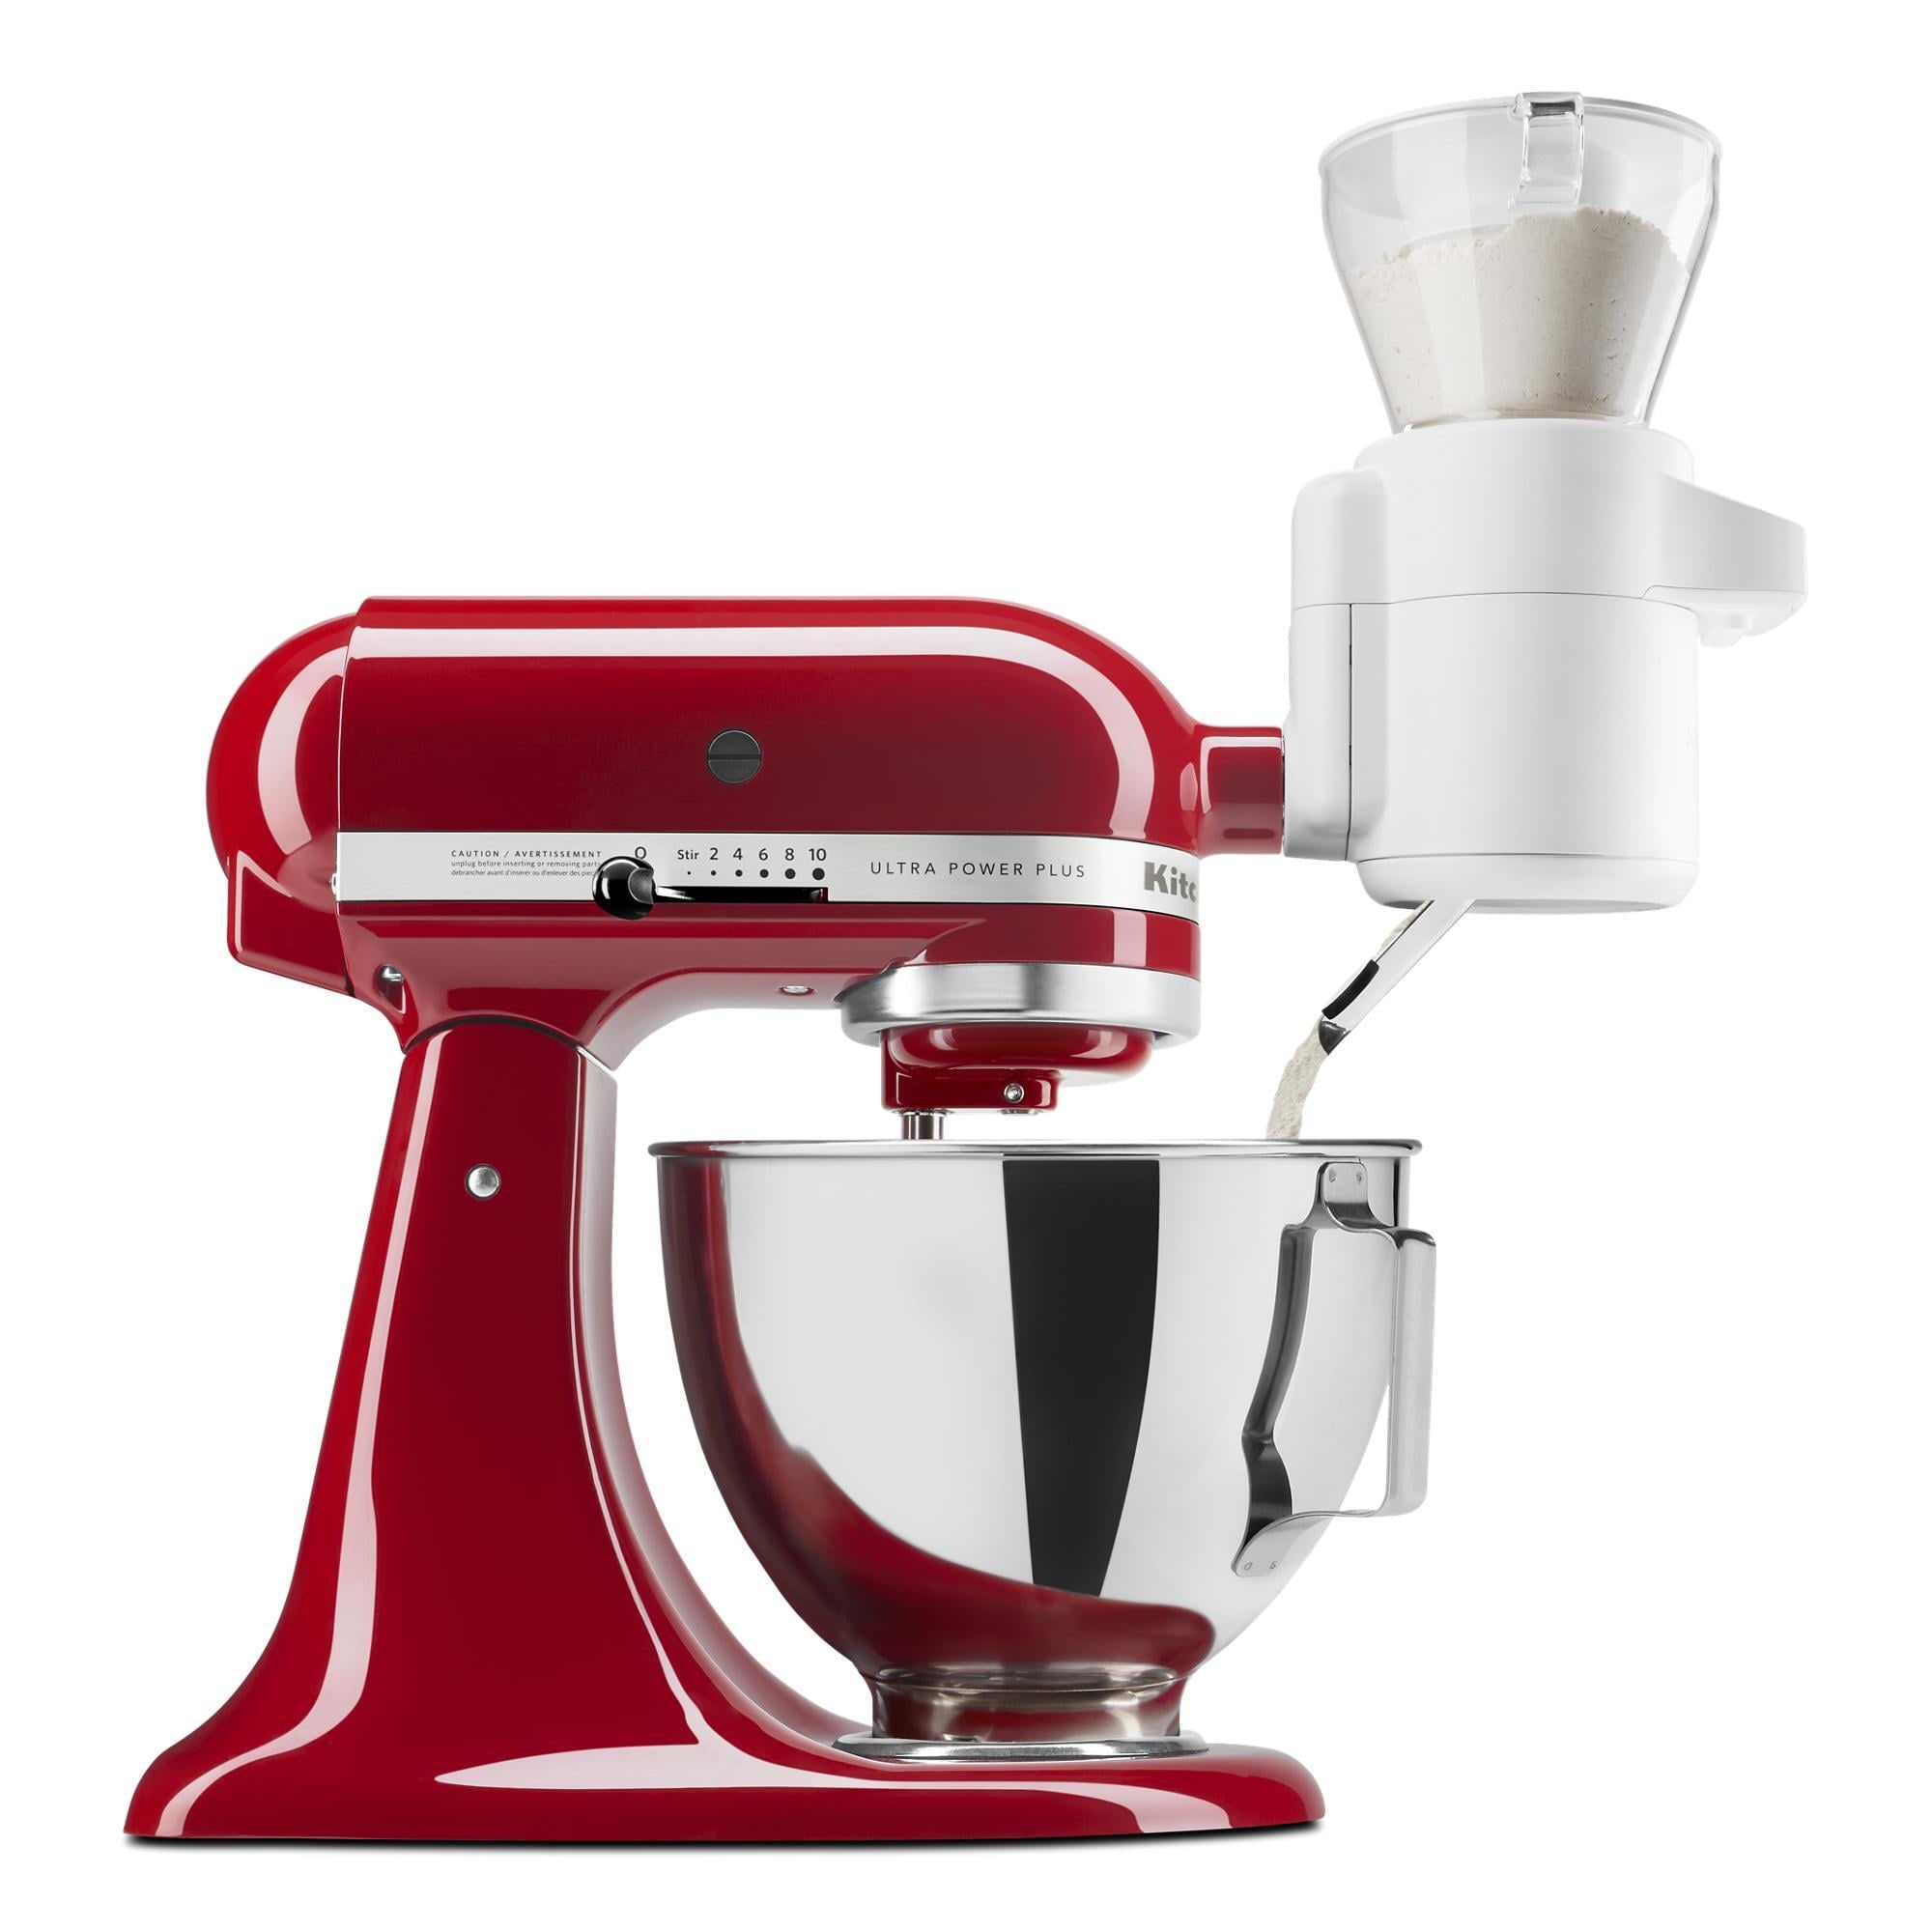 Brentwood SM-1152 5-Speed + Turbo Stand Mixer, White - Brentwood Appliances